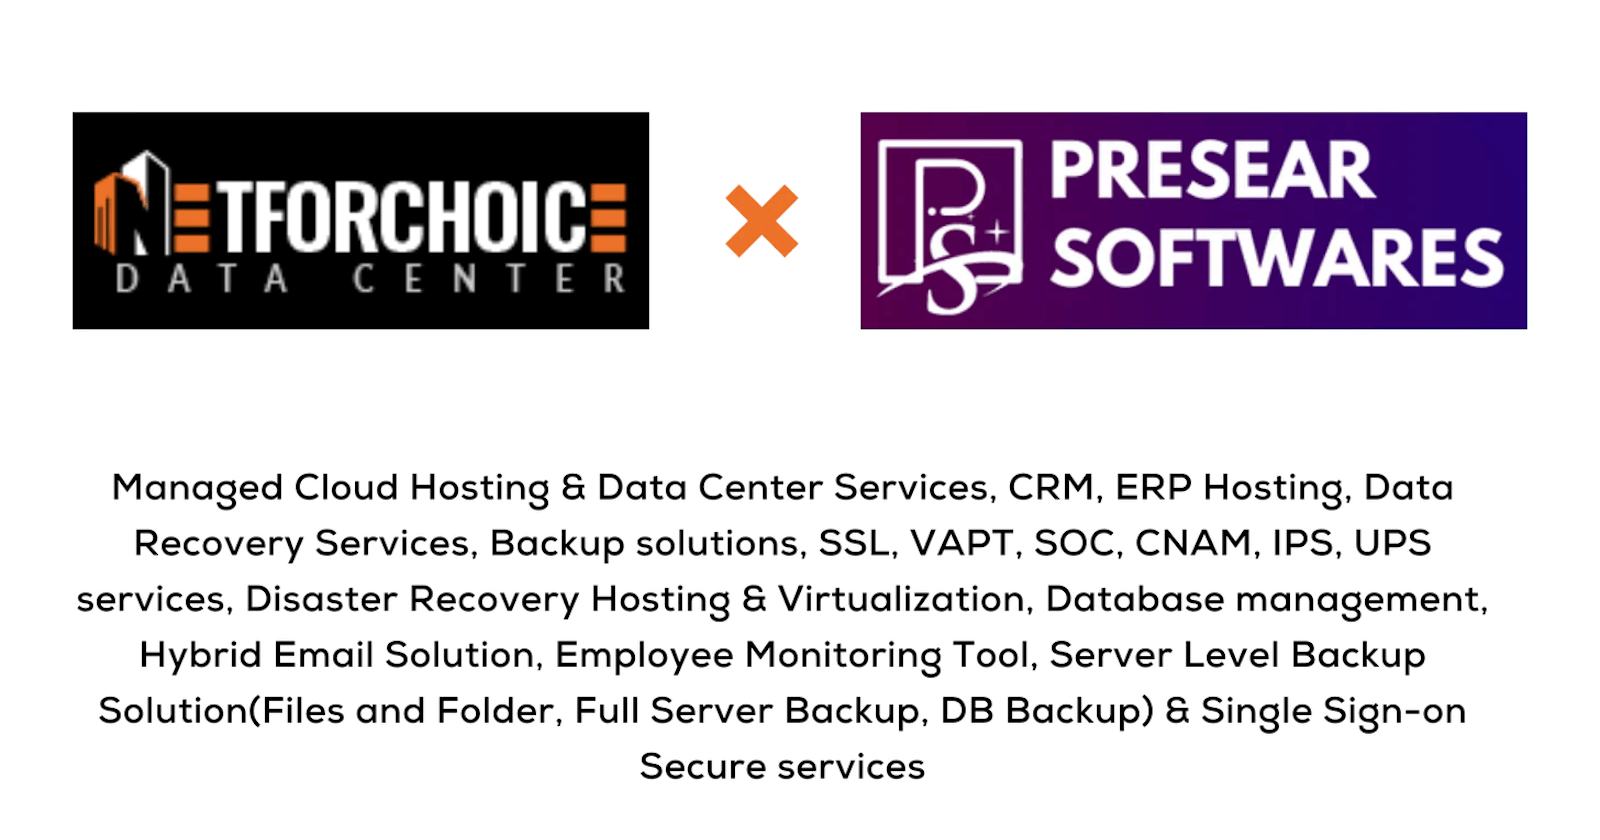 Presear Softwares Announces collaboration with Noida-based Data Center company "Netforchoice" to enhance data-centric software applications